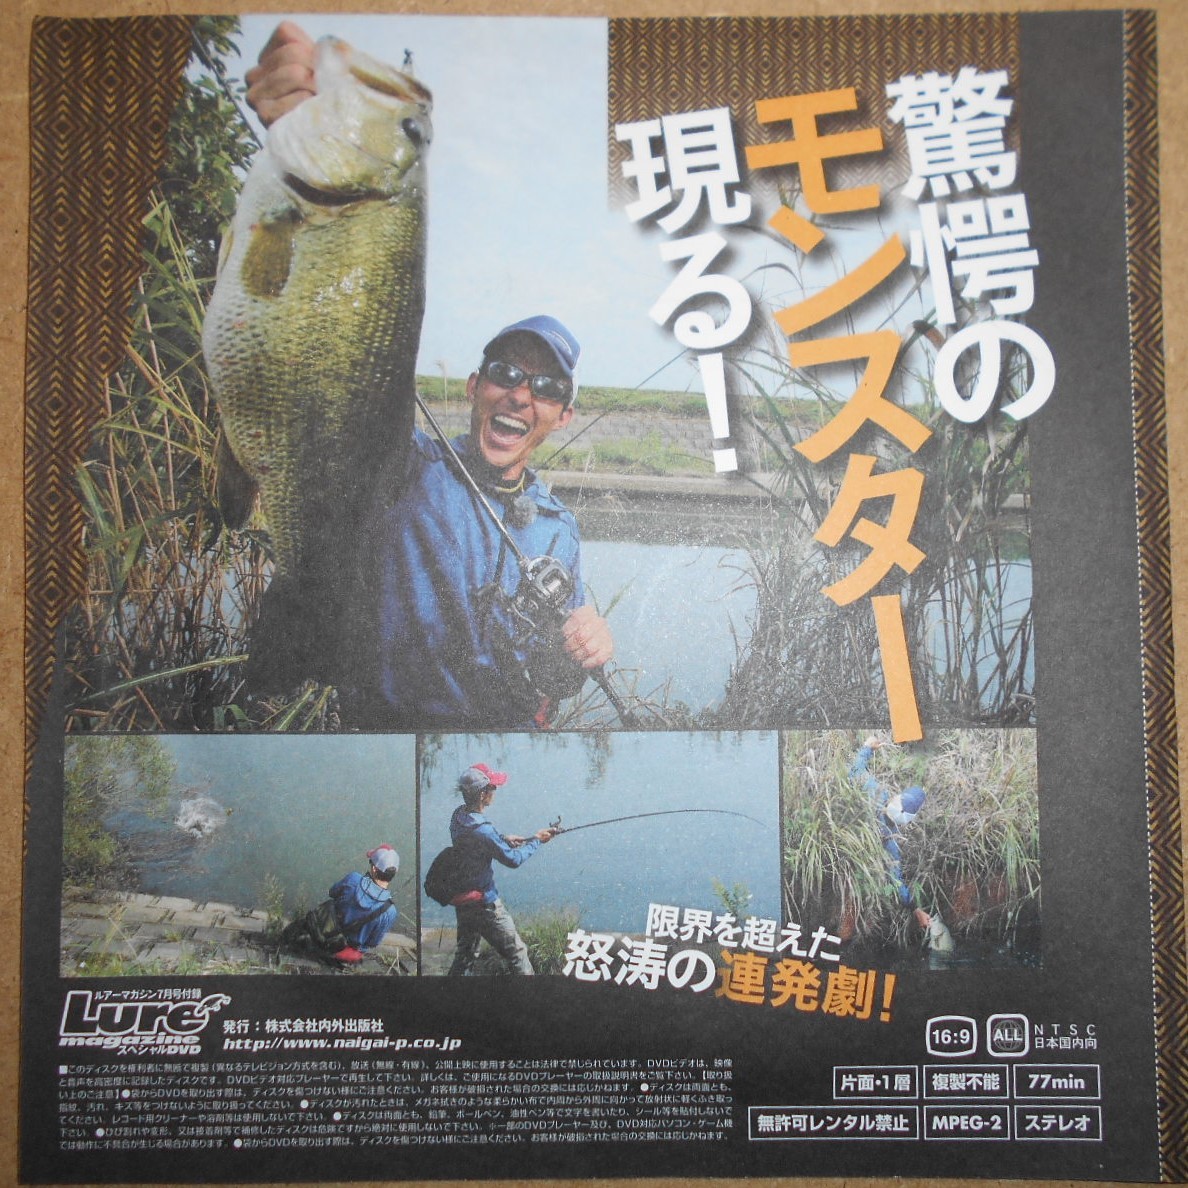 DVD* lure magazine Special life fishing R. light. line person river . light large . unopened new goods!!. pieces . north . water series bus fishing 